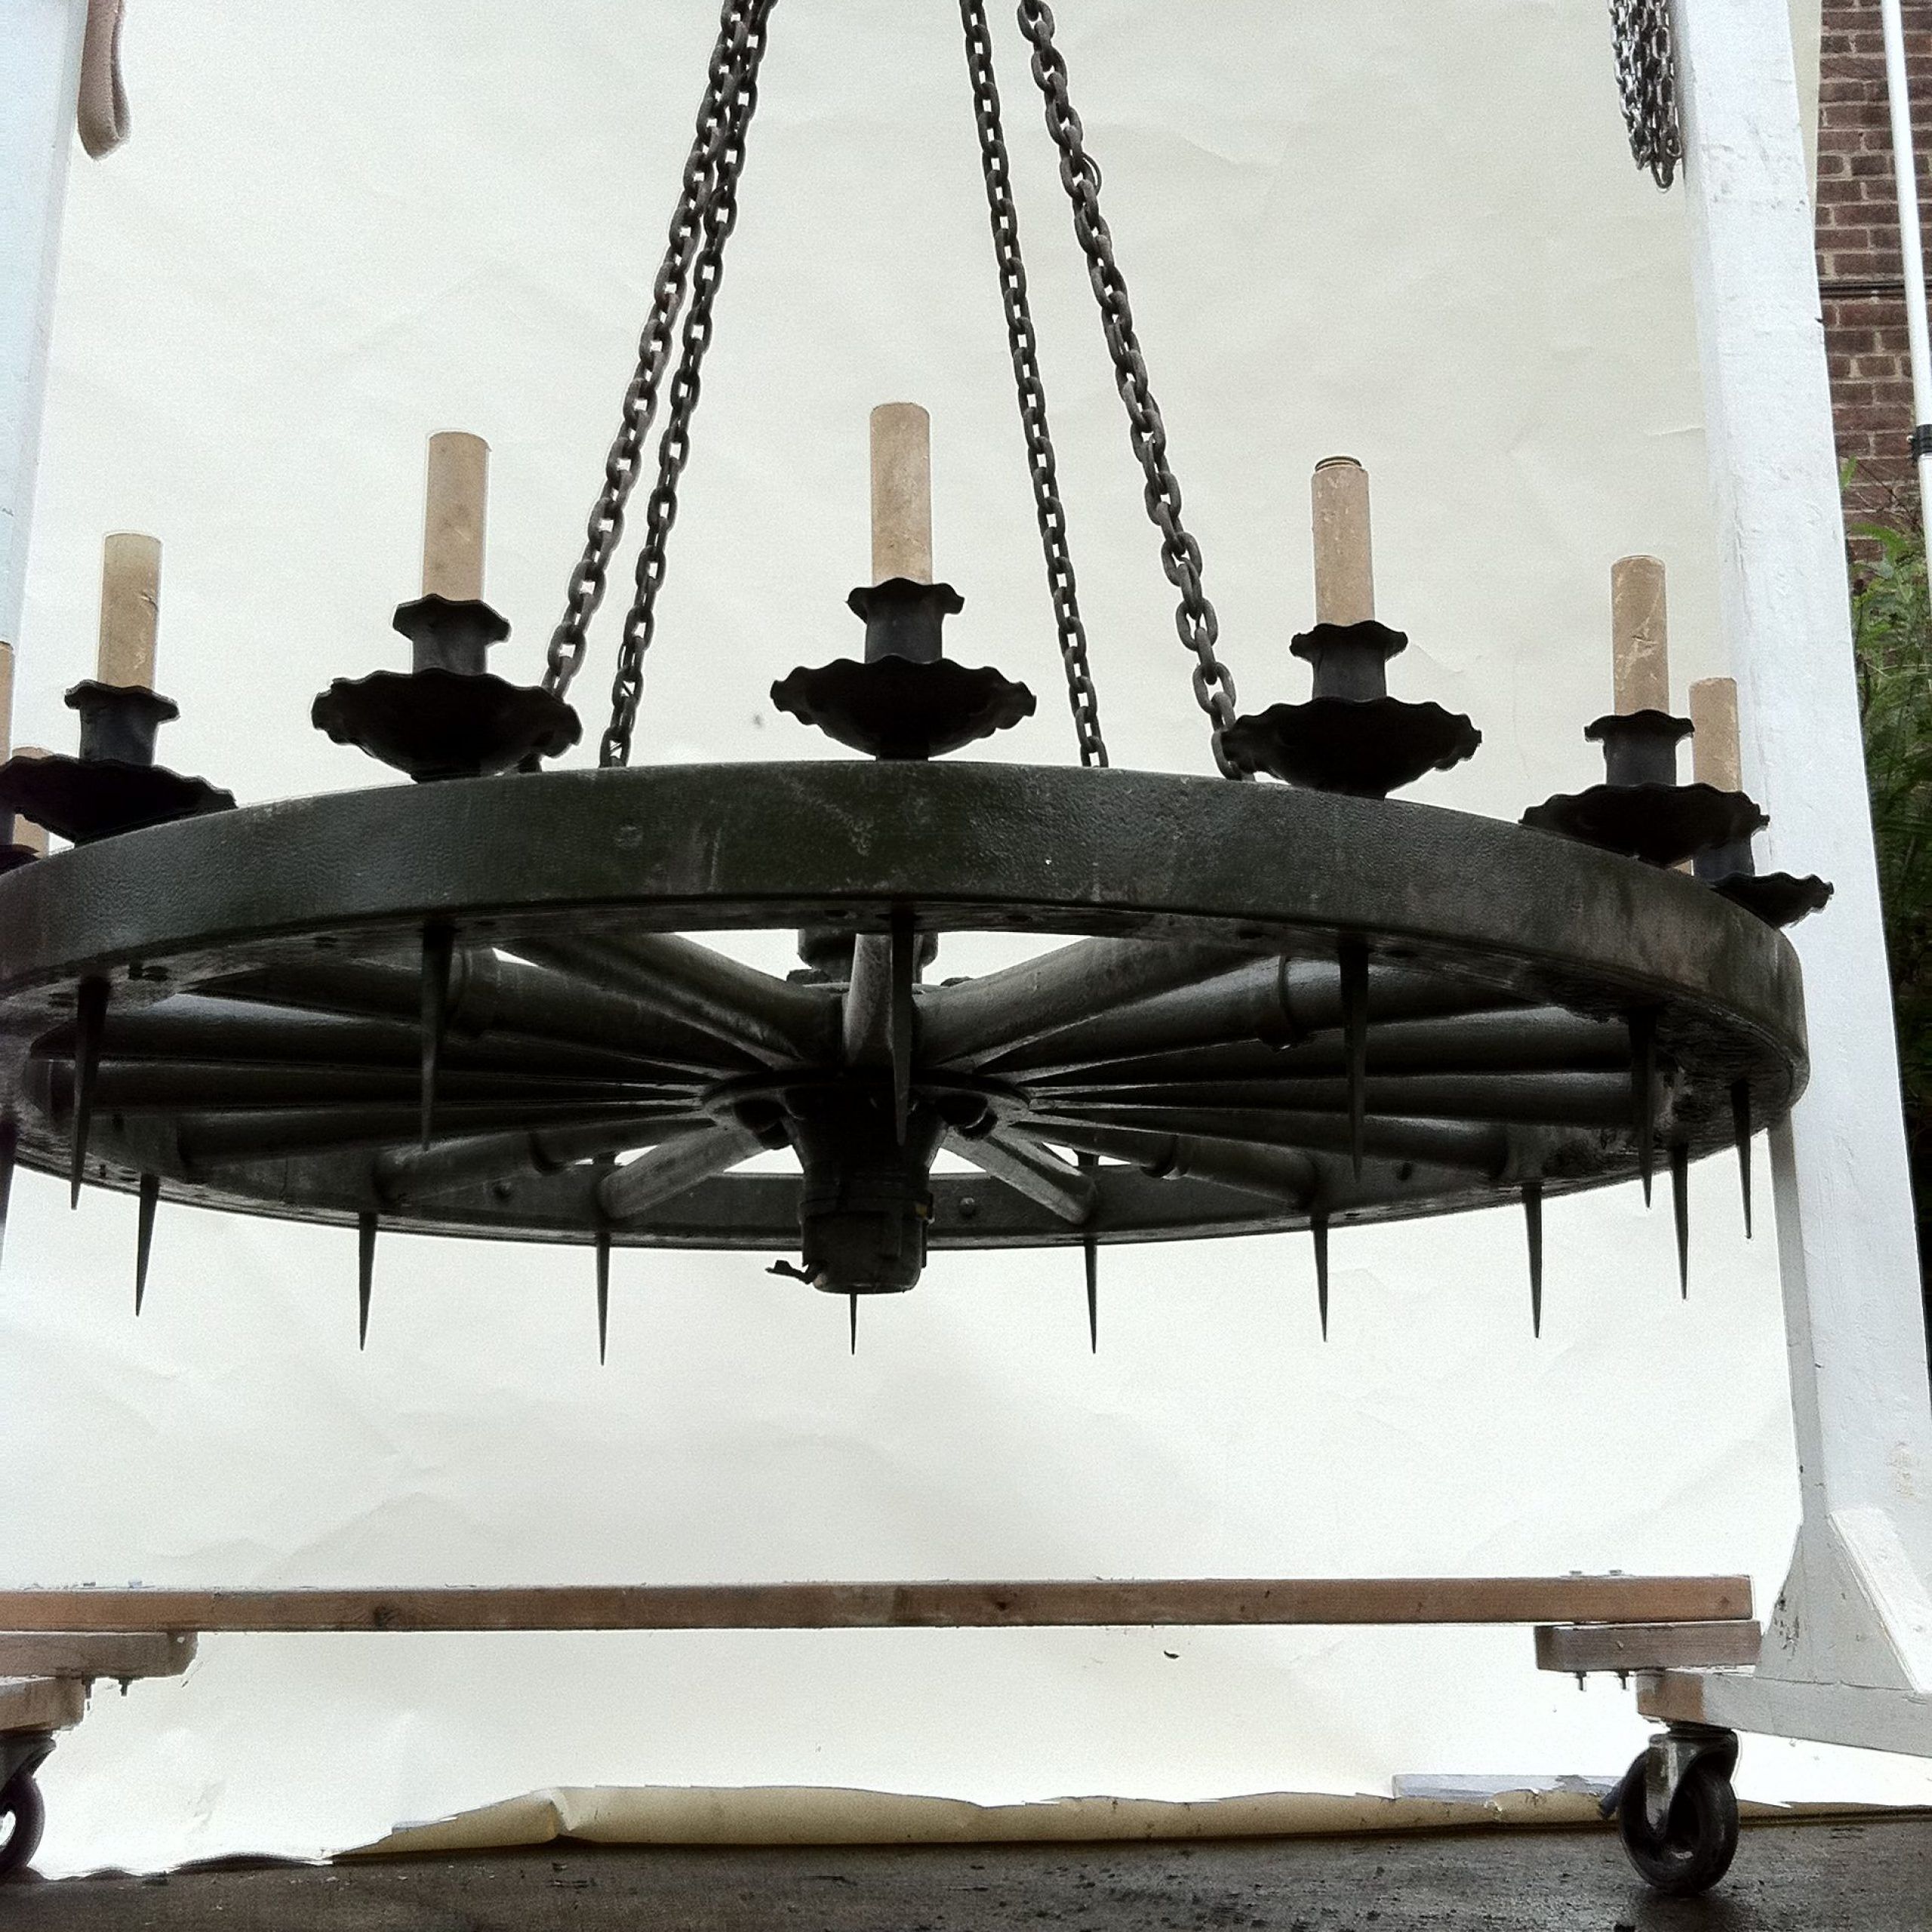 Fashionable Weathered Oak Wagon Wheel Chandeliers Pertaining To This Is A Custom Designed And Made Wagon Wheel Chandelier (View 19 of 20)